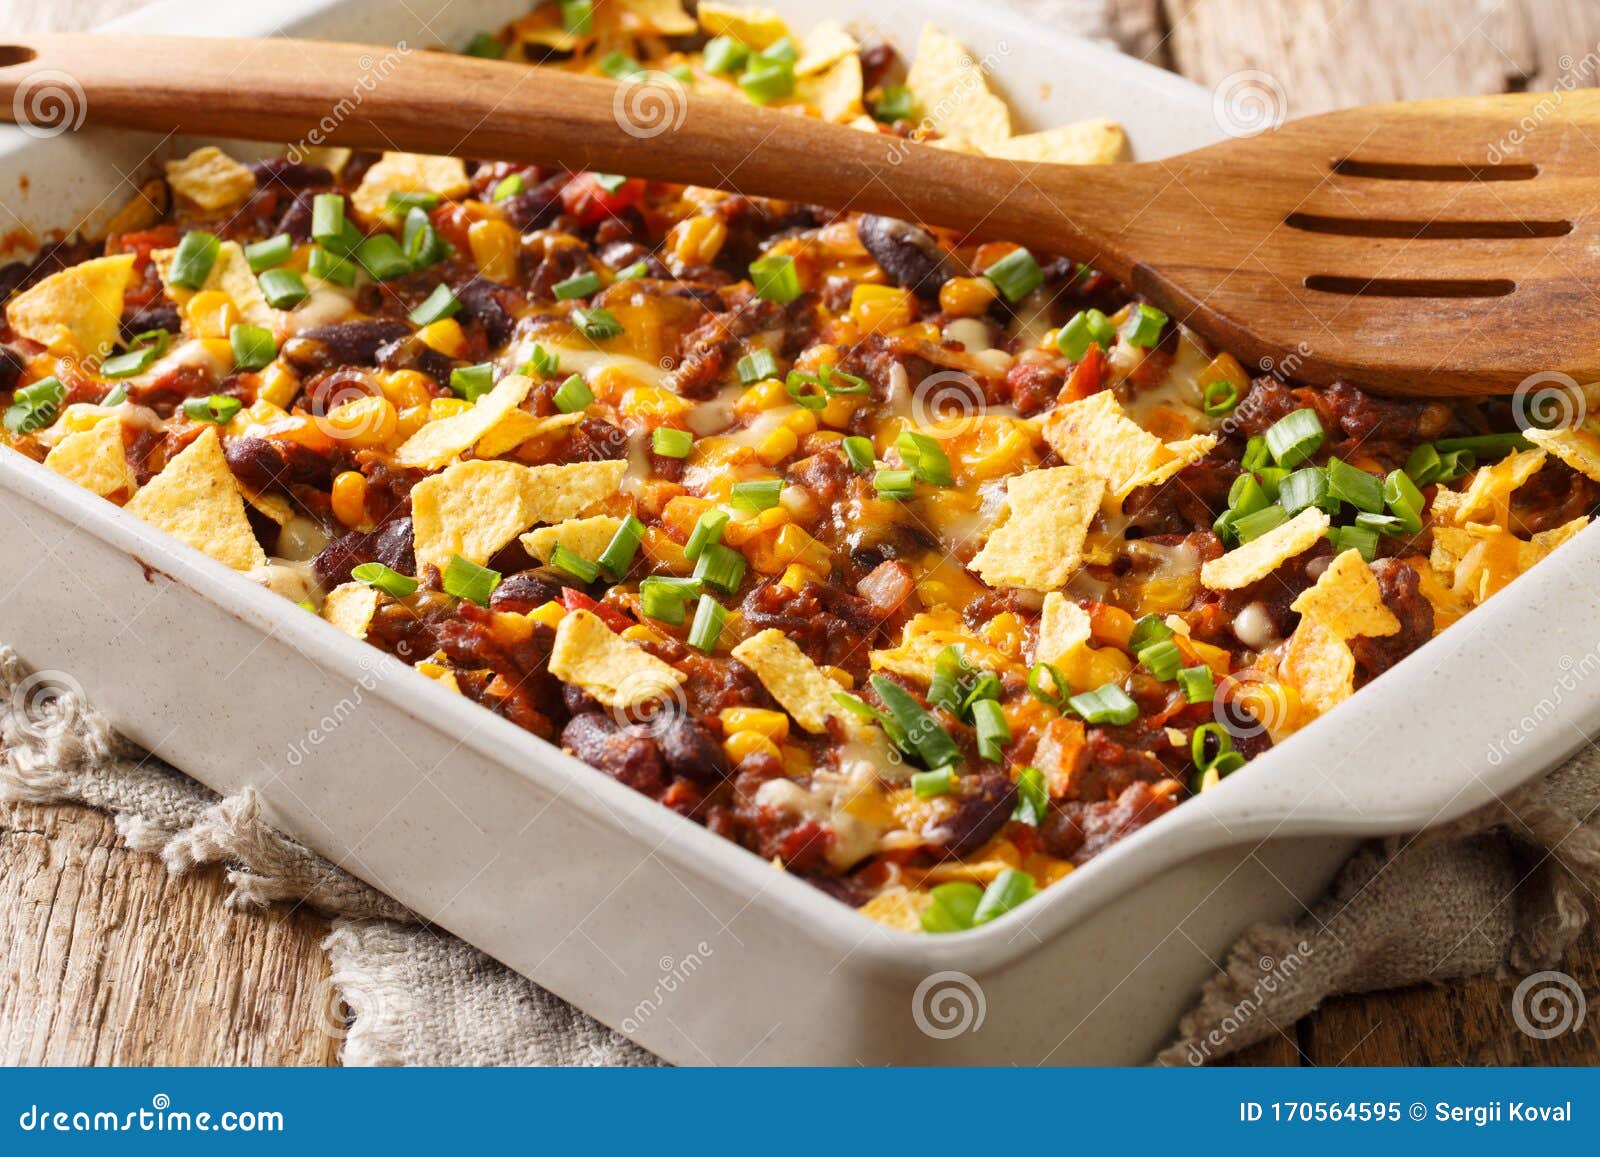 recipe for a delicious frito pie with ground beef, cheese, corn, beans and chips close-up in a baking dish. horizontal